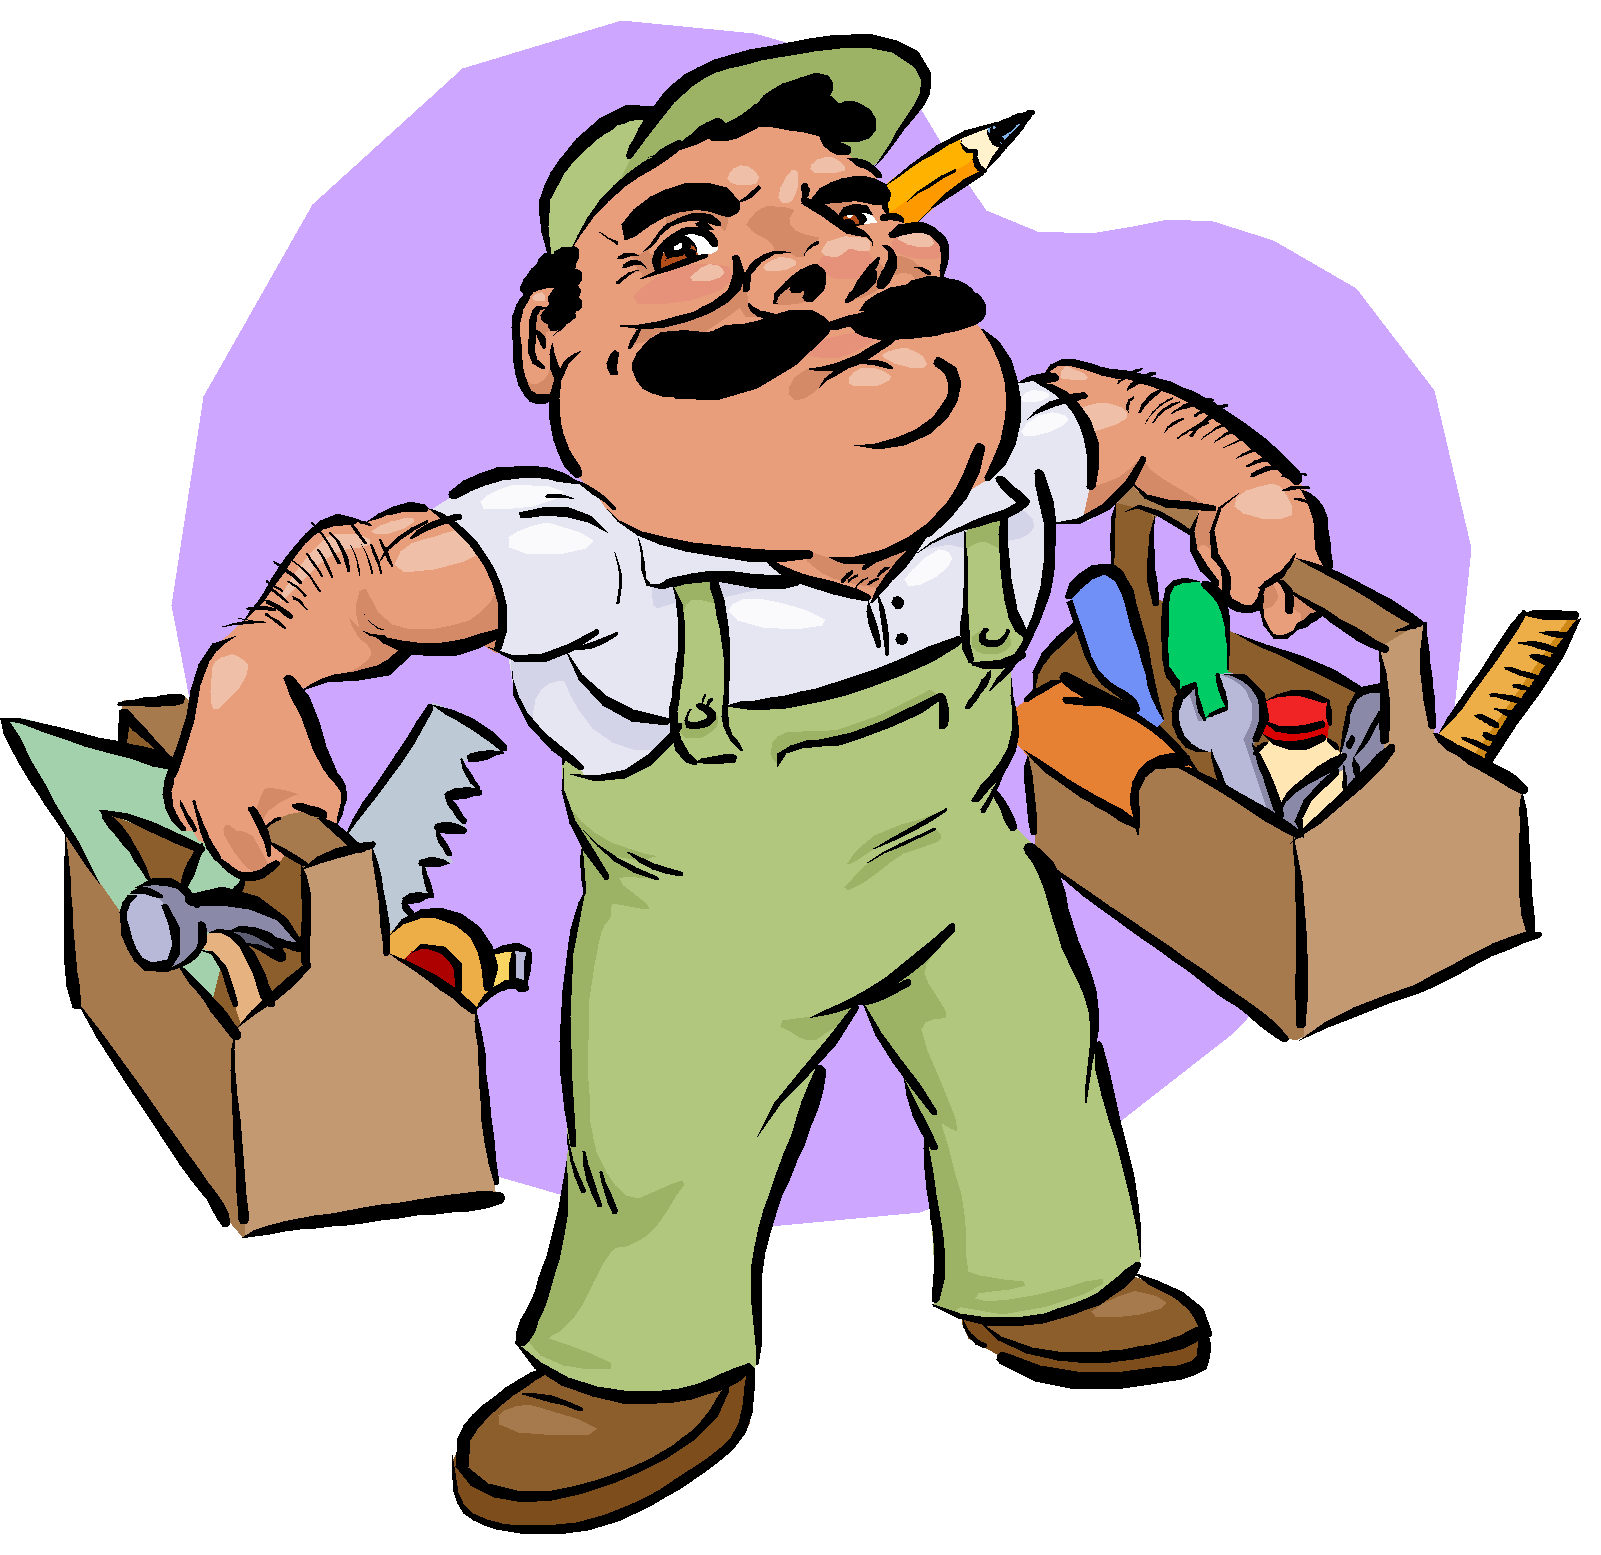 contractor clipart electricity